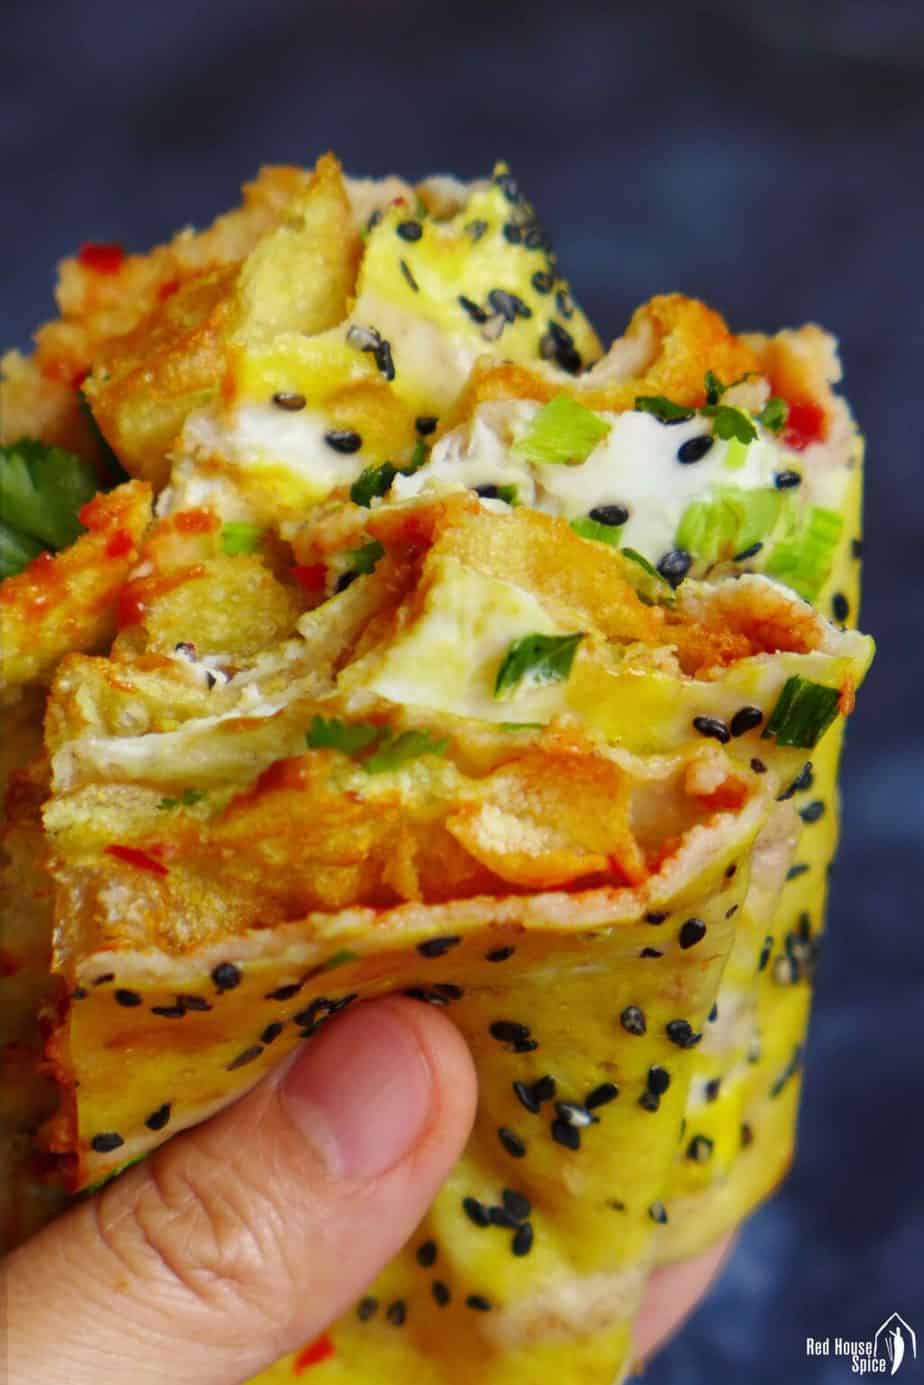 Jian Bing, Chinese Crepes (煎饼) - Red House Spice